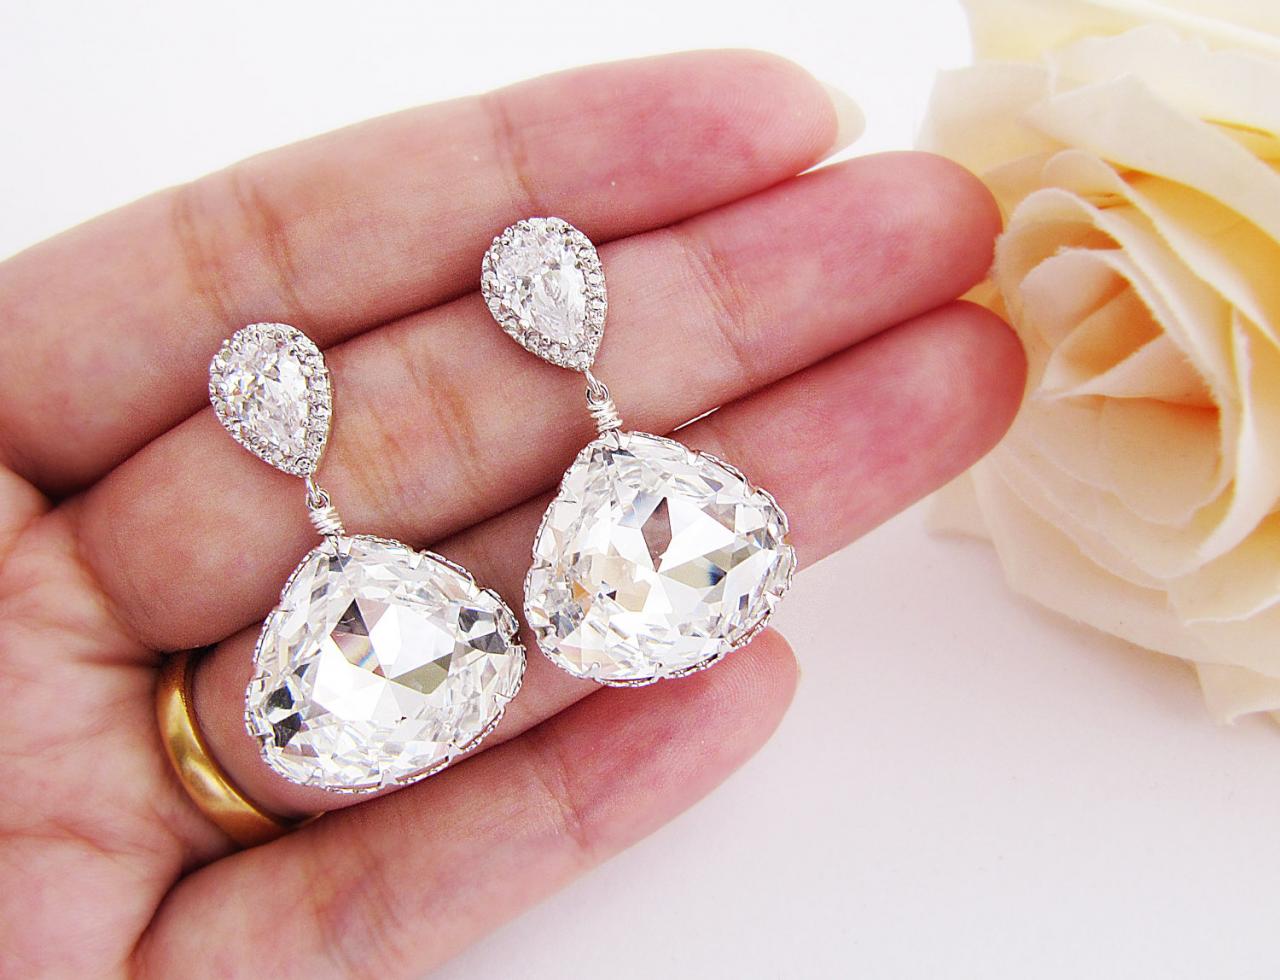 Bridal Earrings Bridesmaid Earrings Matte Rodium Plated Cubic Zirconia Earrings With Clear White Swarovski Crystal Triangle Drops